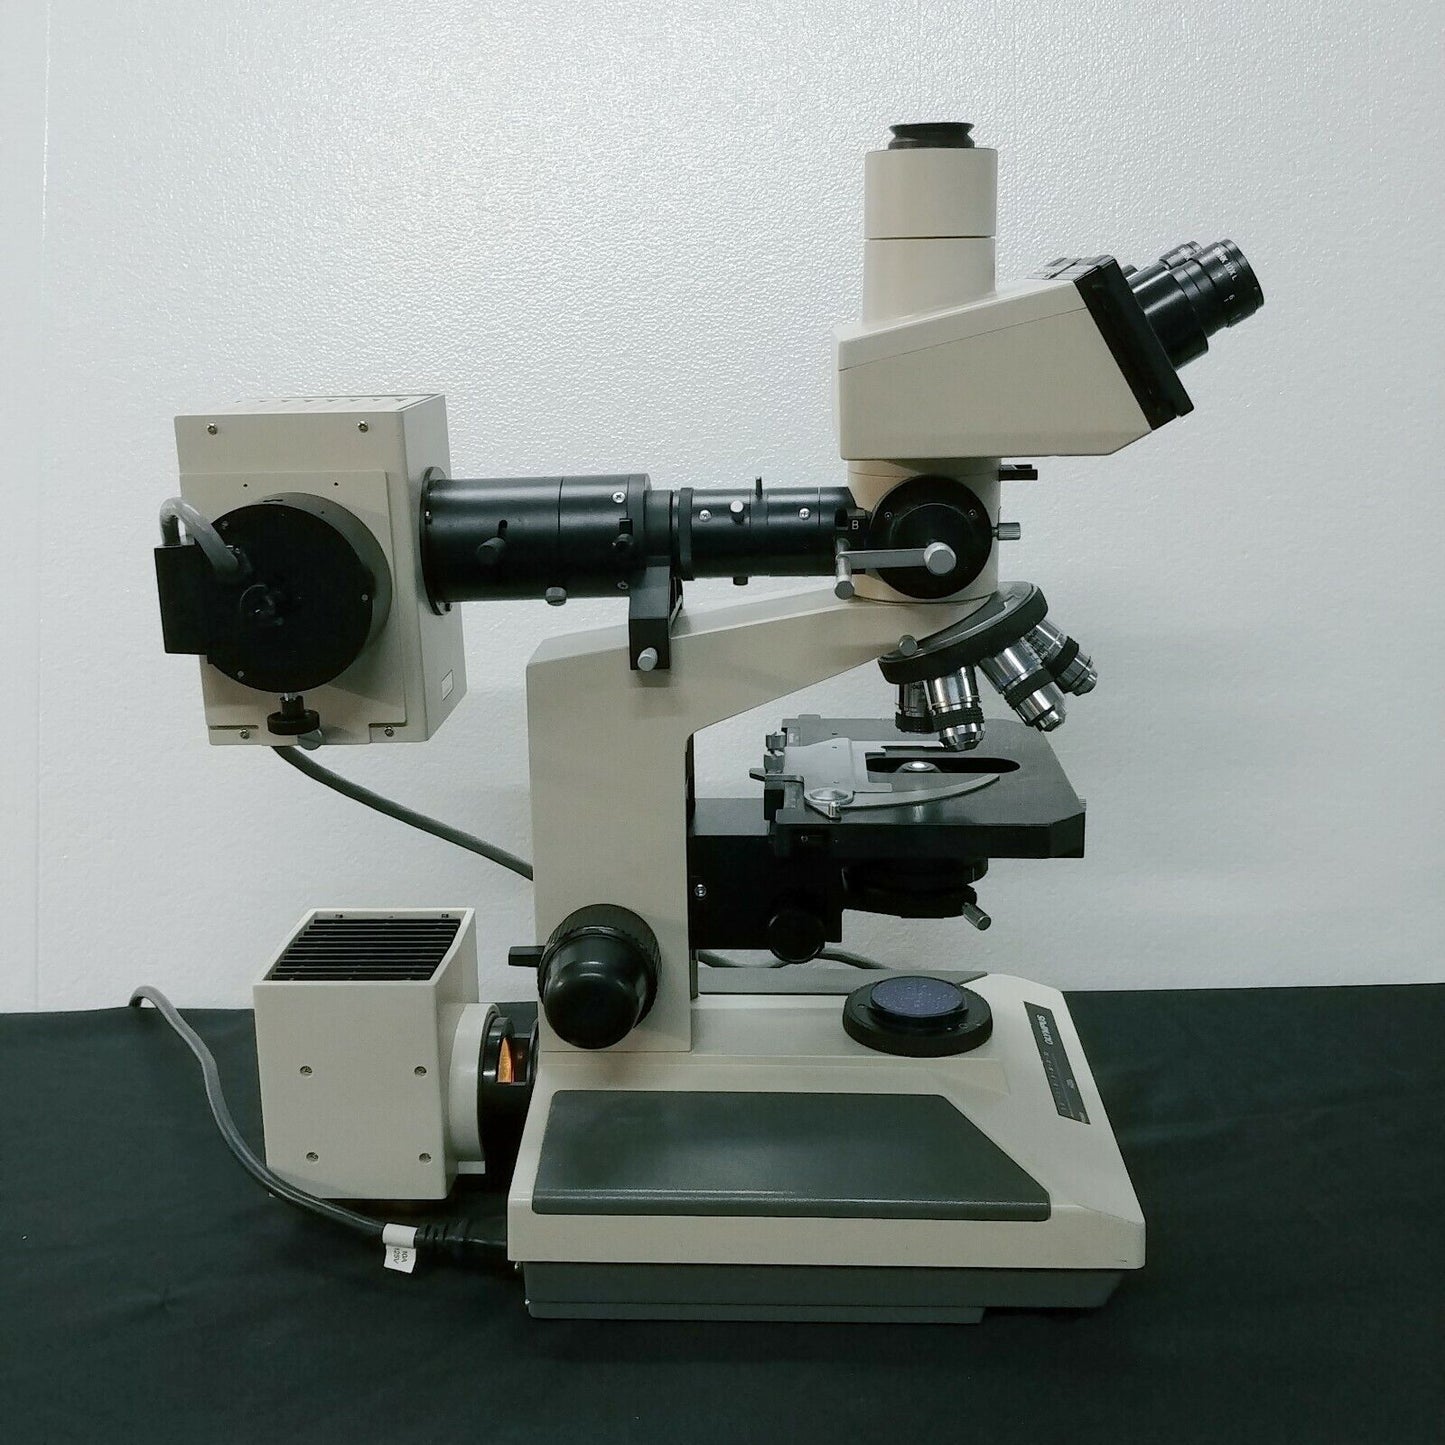 Olympus Microscope BH2 with Fluorescence and Superwide Trinocular Head - microscopemarketplace